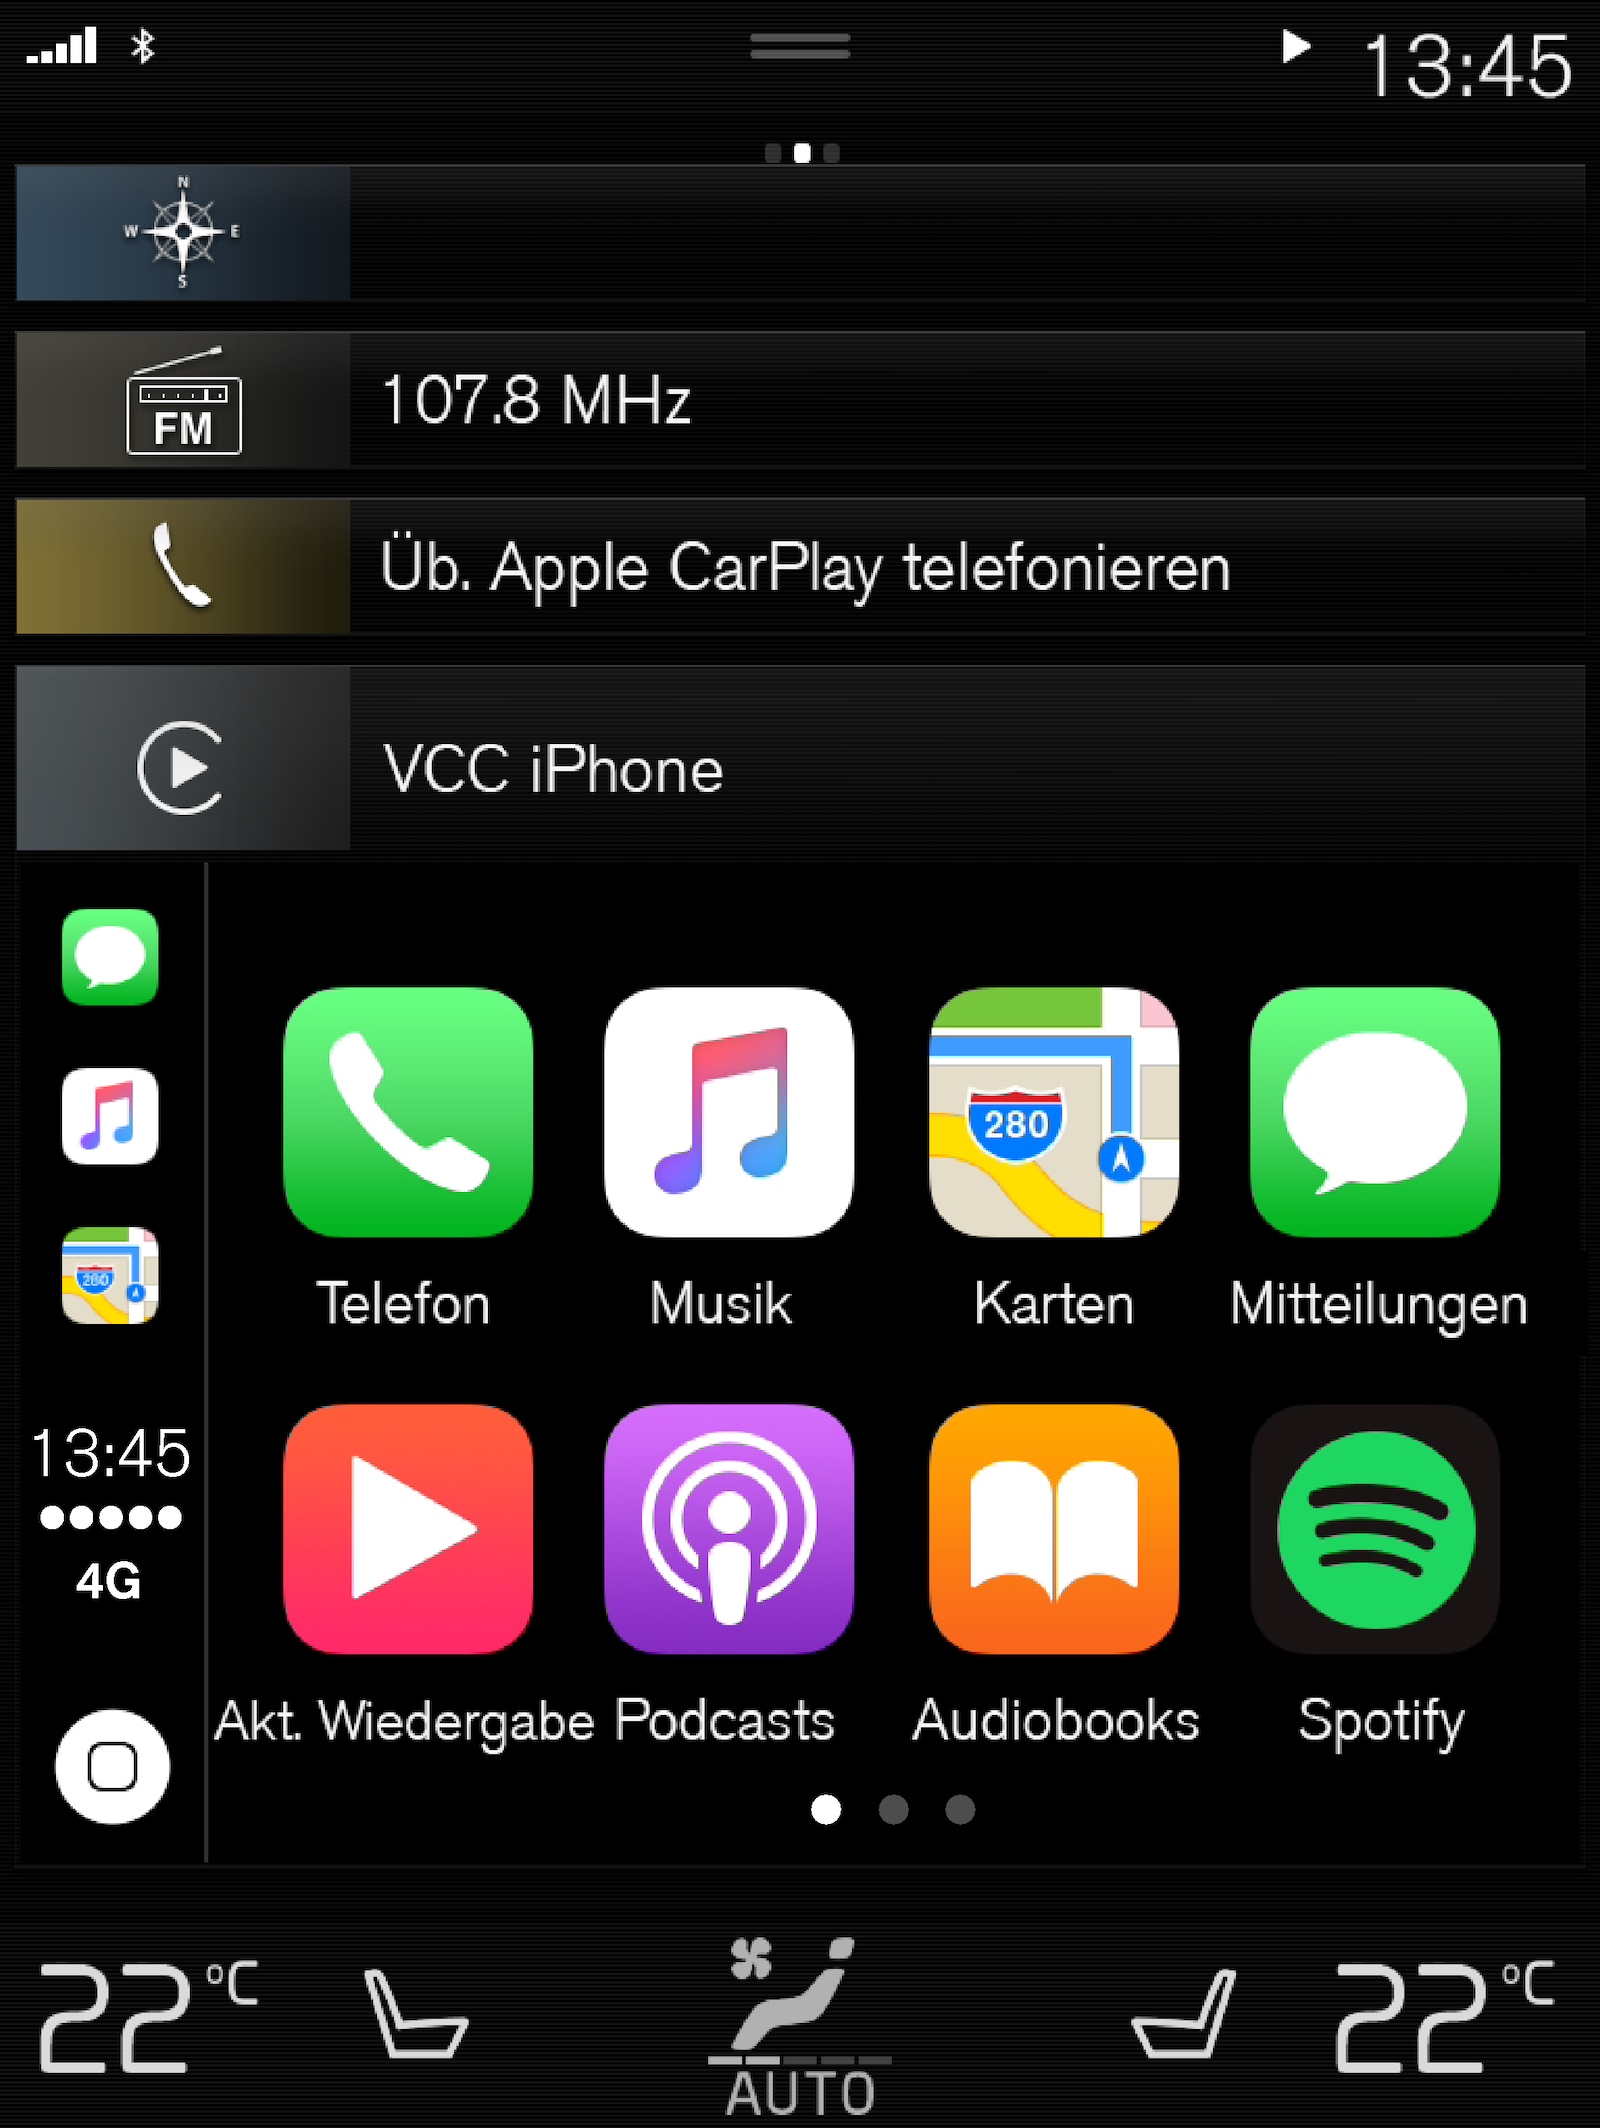 15w49 - Support site - Apple CarPlay apps view - DEU